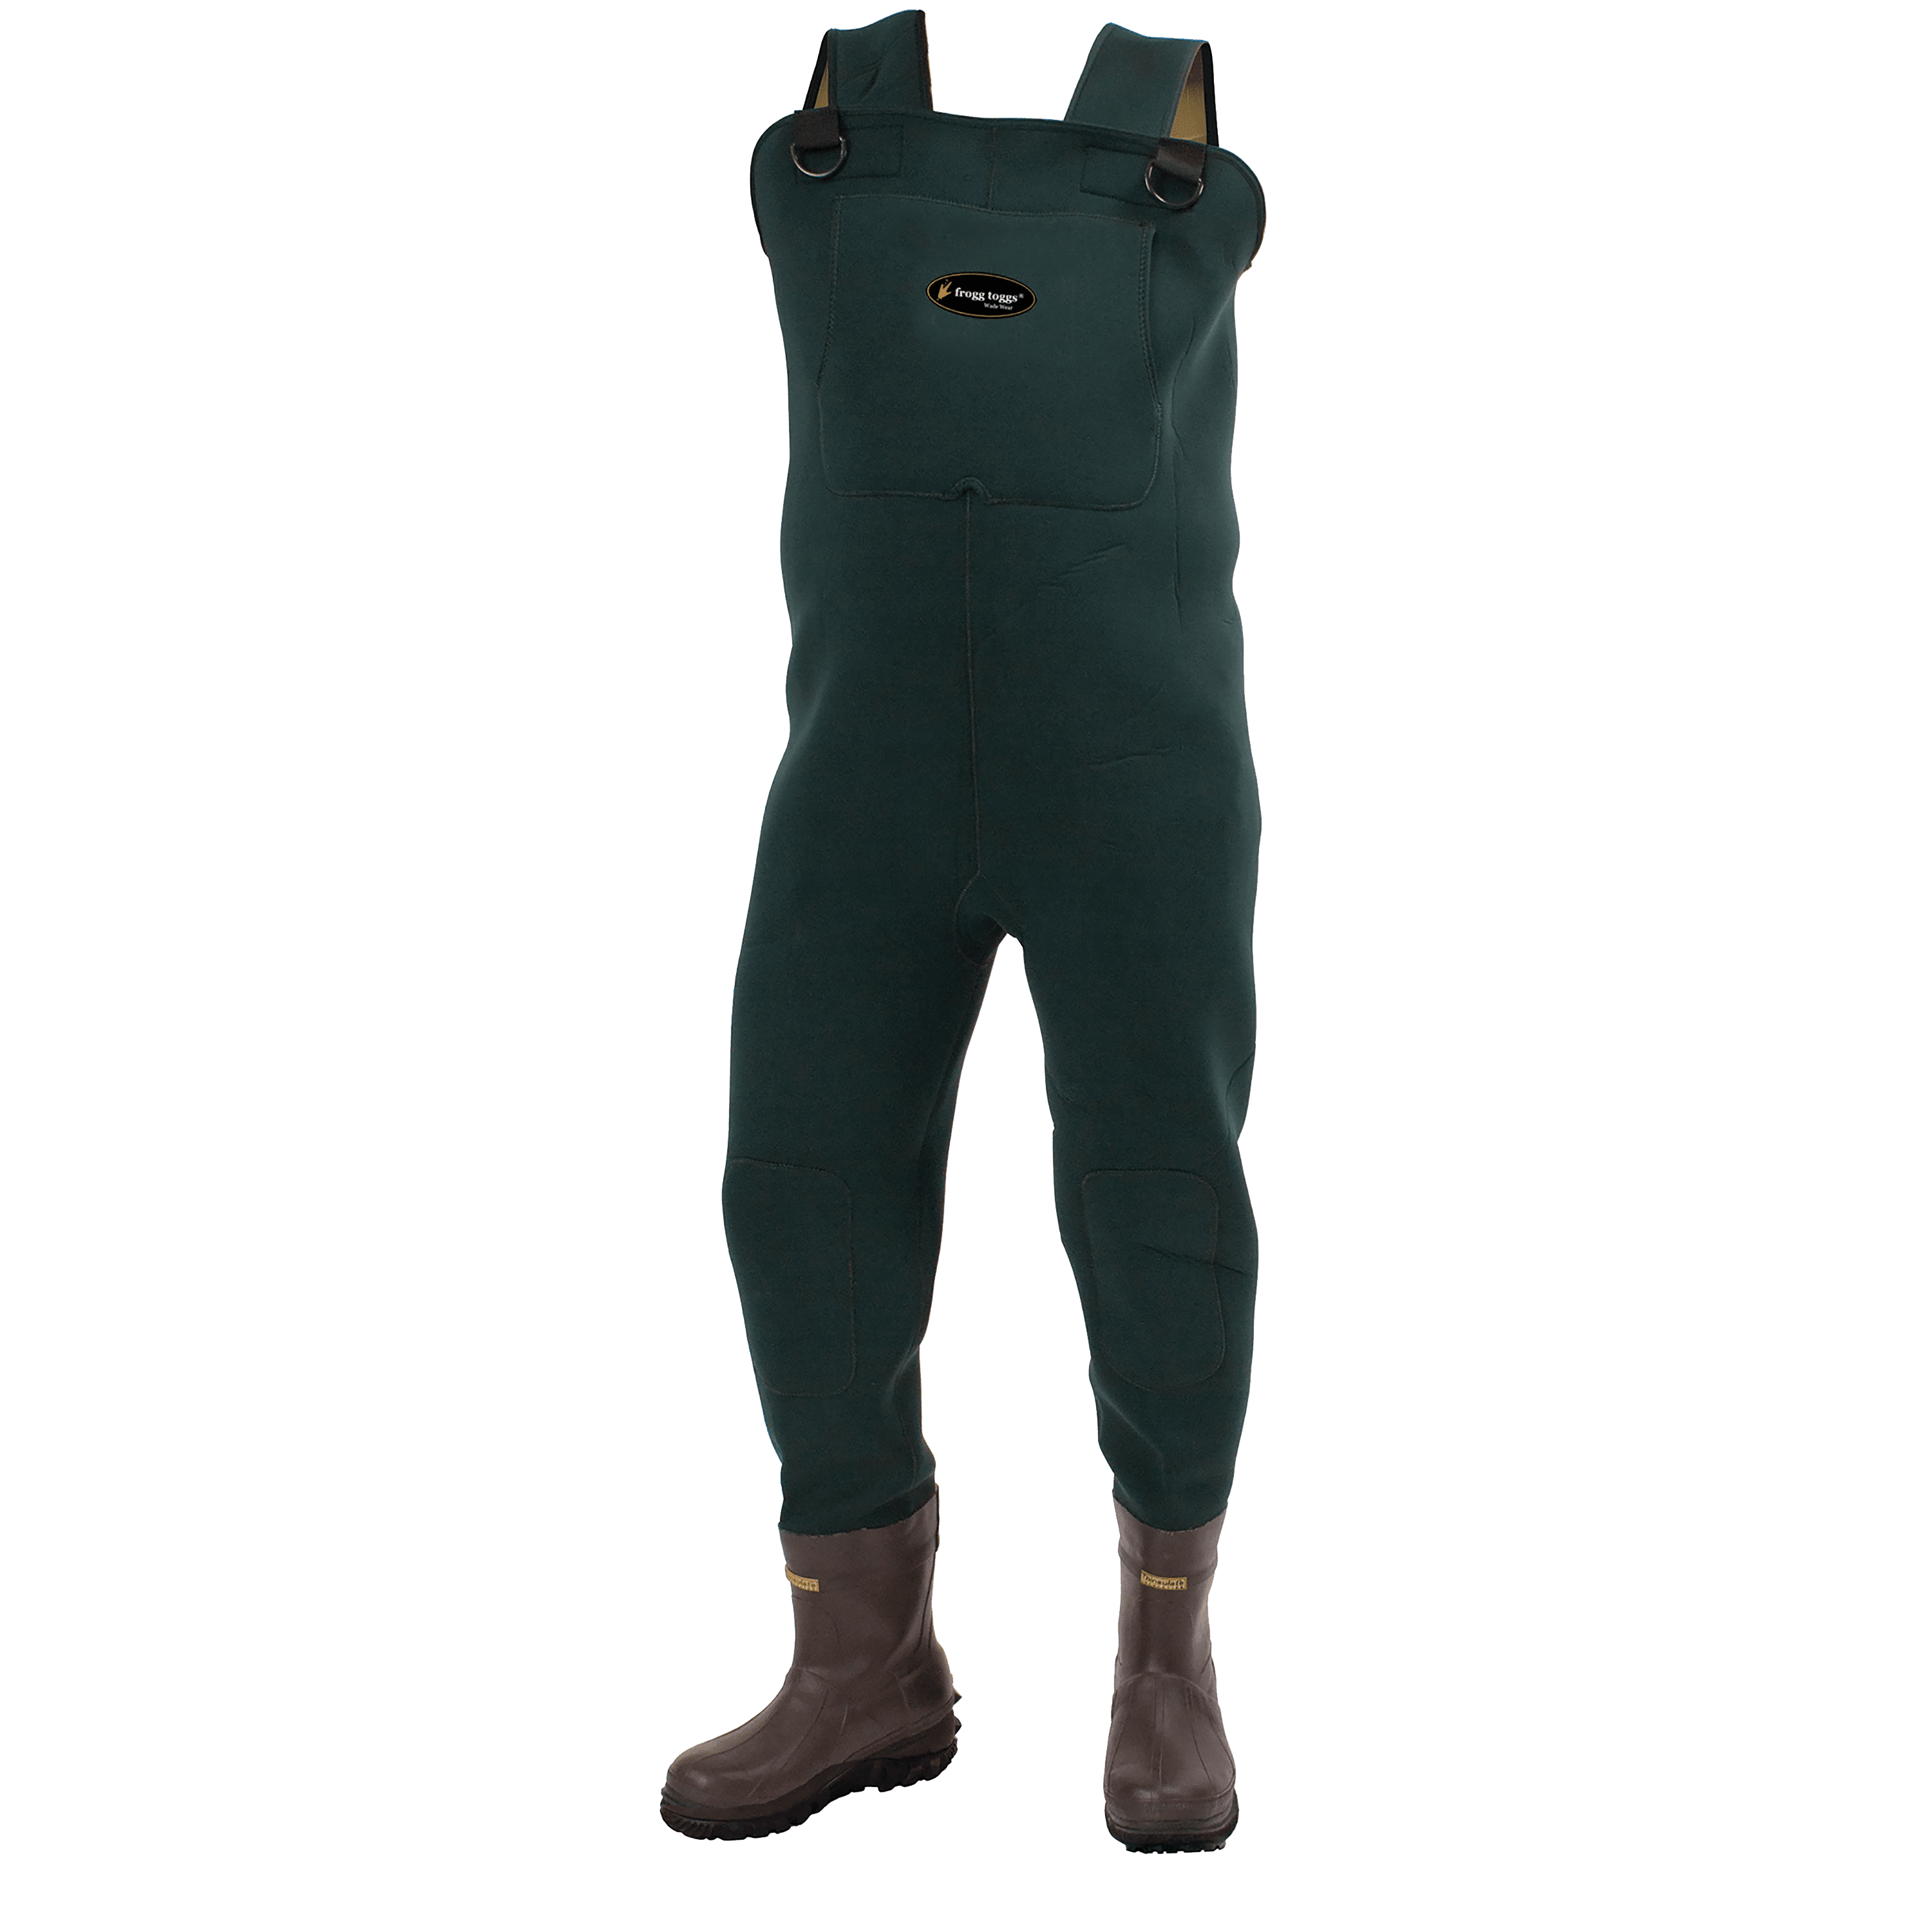 Shakespeare Sigma Nylon Chest Fishing Waders Cleated Sole Sizes 7 to12 Green 